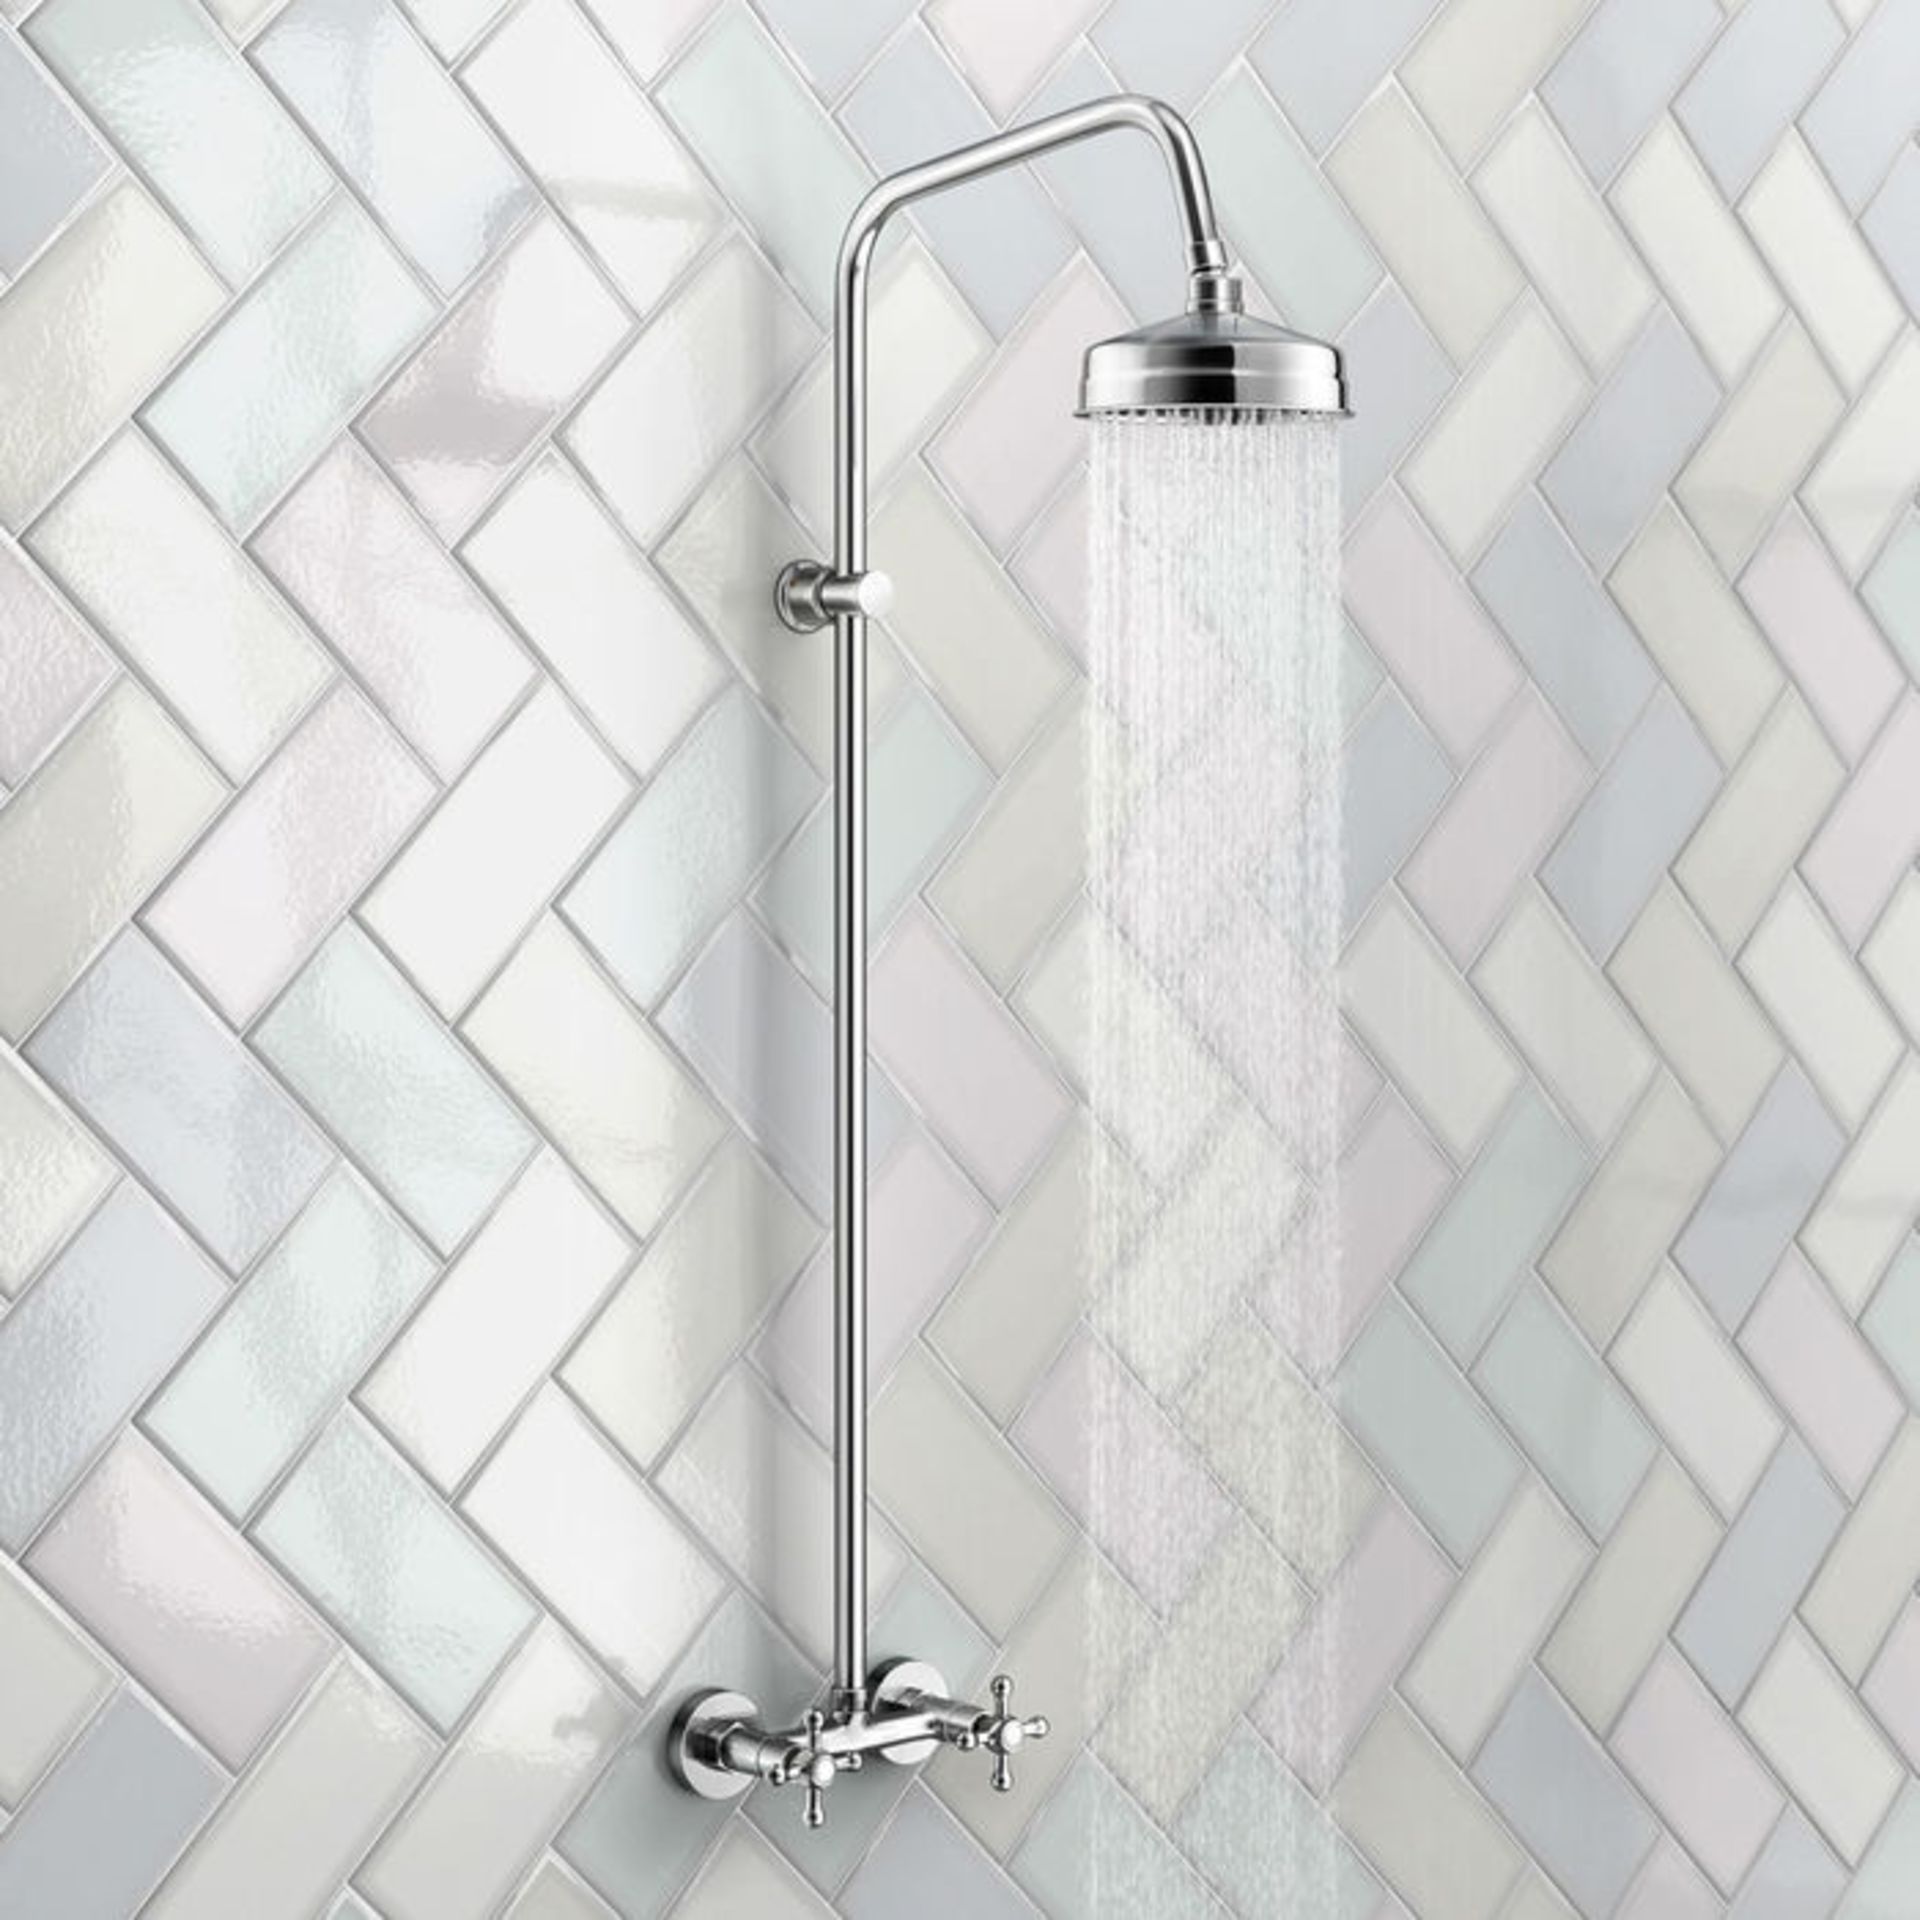 (QW26) Traditional Exposed Shower & Medium Head. Exposed design makes for a statement piece - Image 3 of 12